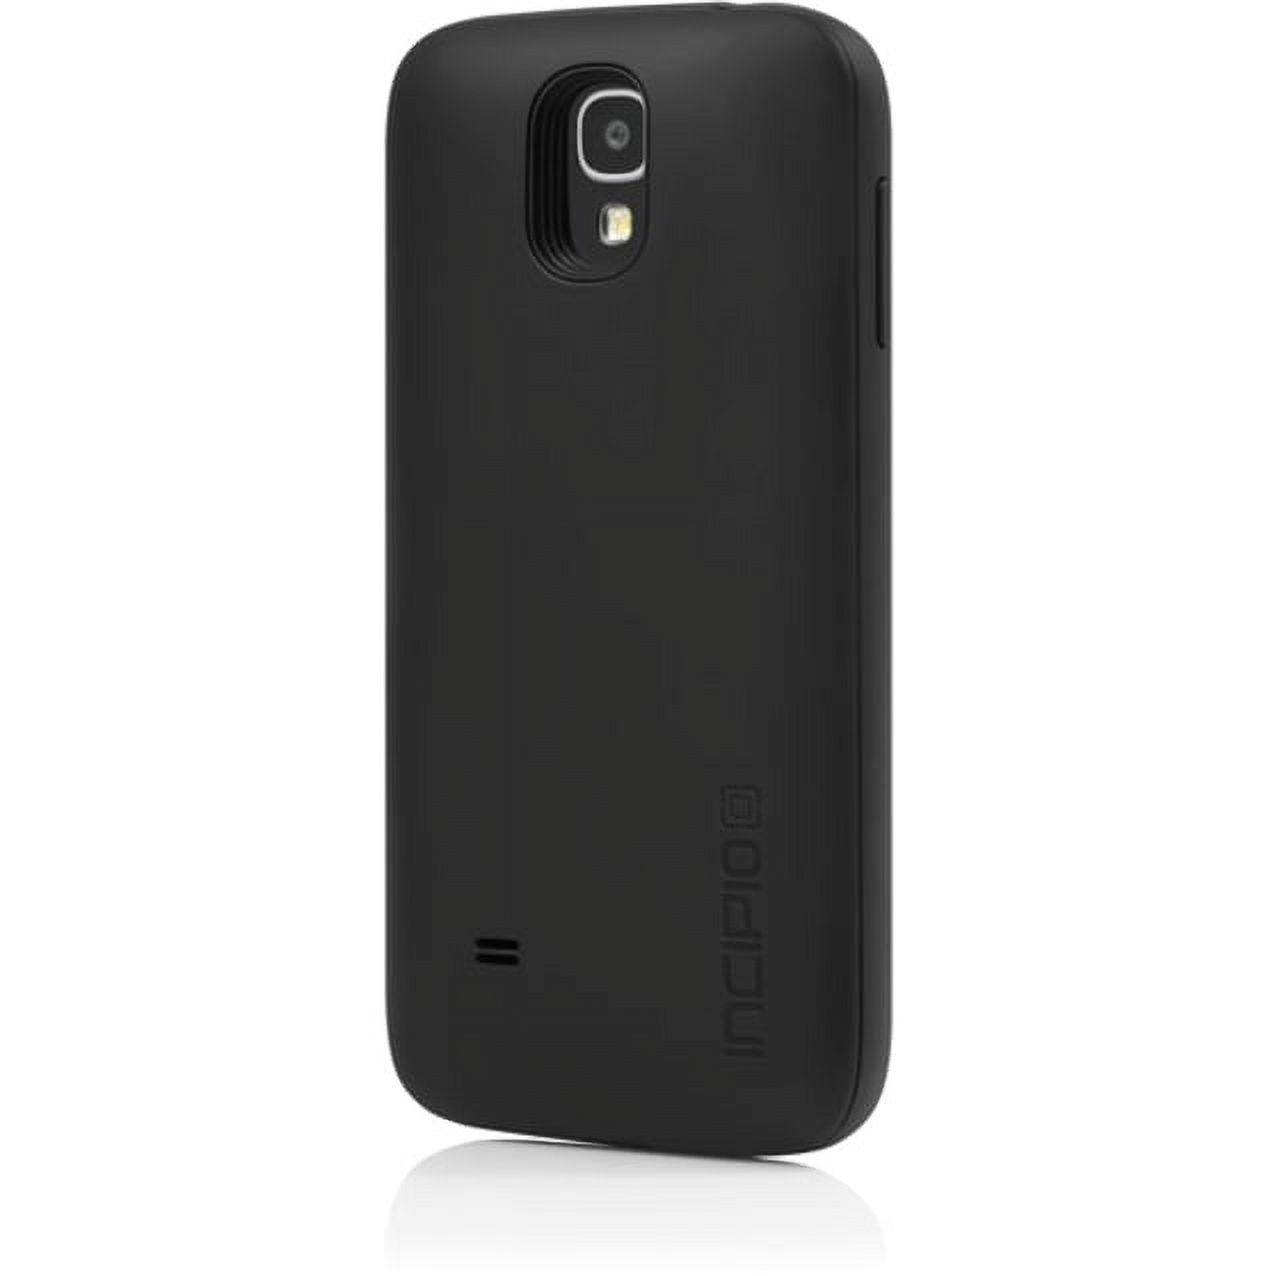 Incipio offGRID Backup Battery Case for Samsung Galaxy S4 - image 1 of 2